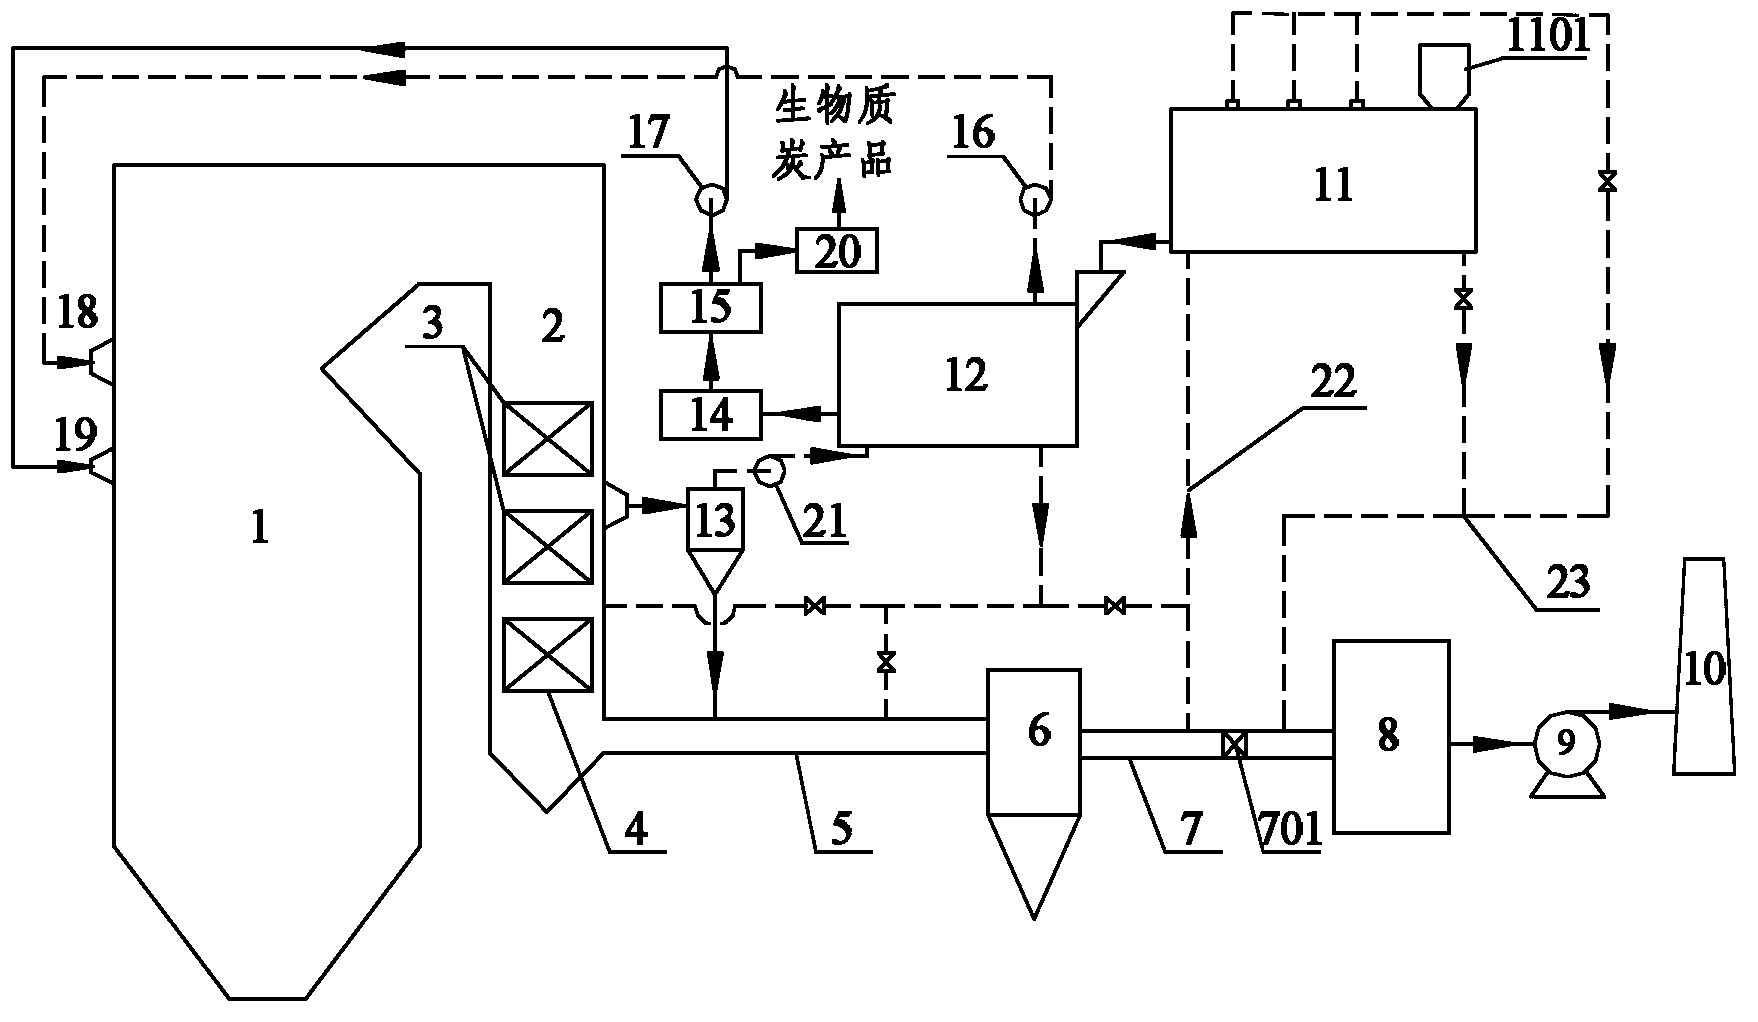 System and method for drying and carbonizing biomass raw material by using boiler flue gas